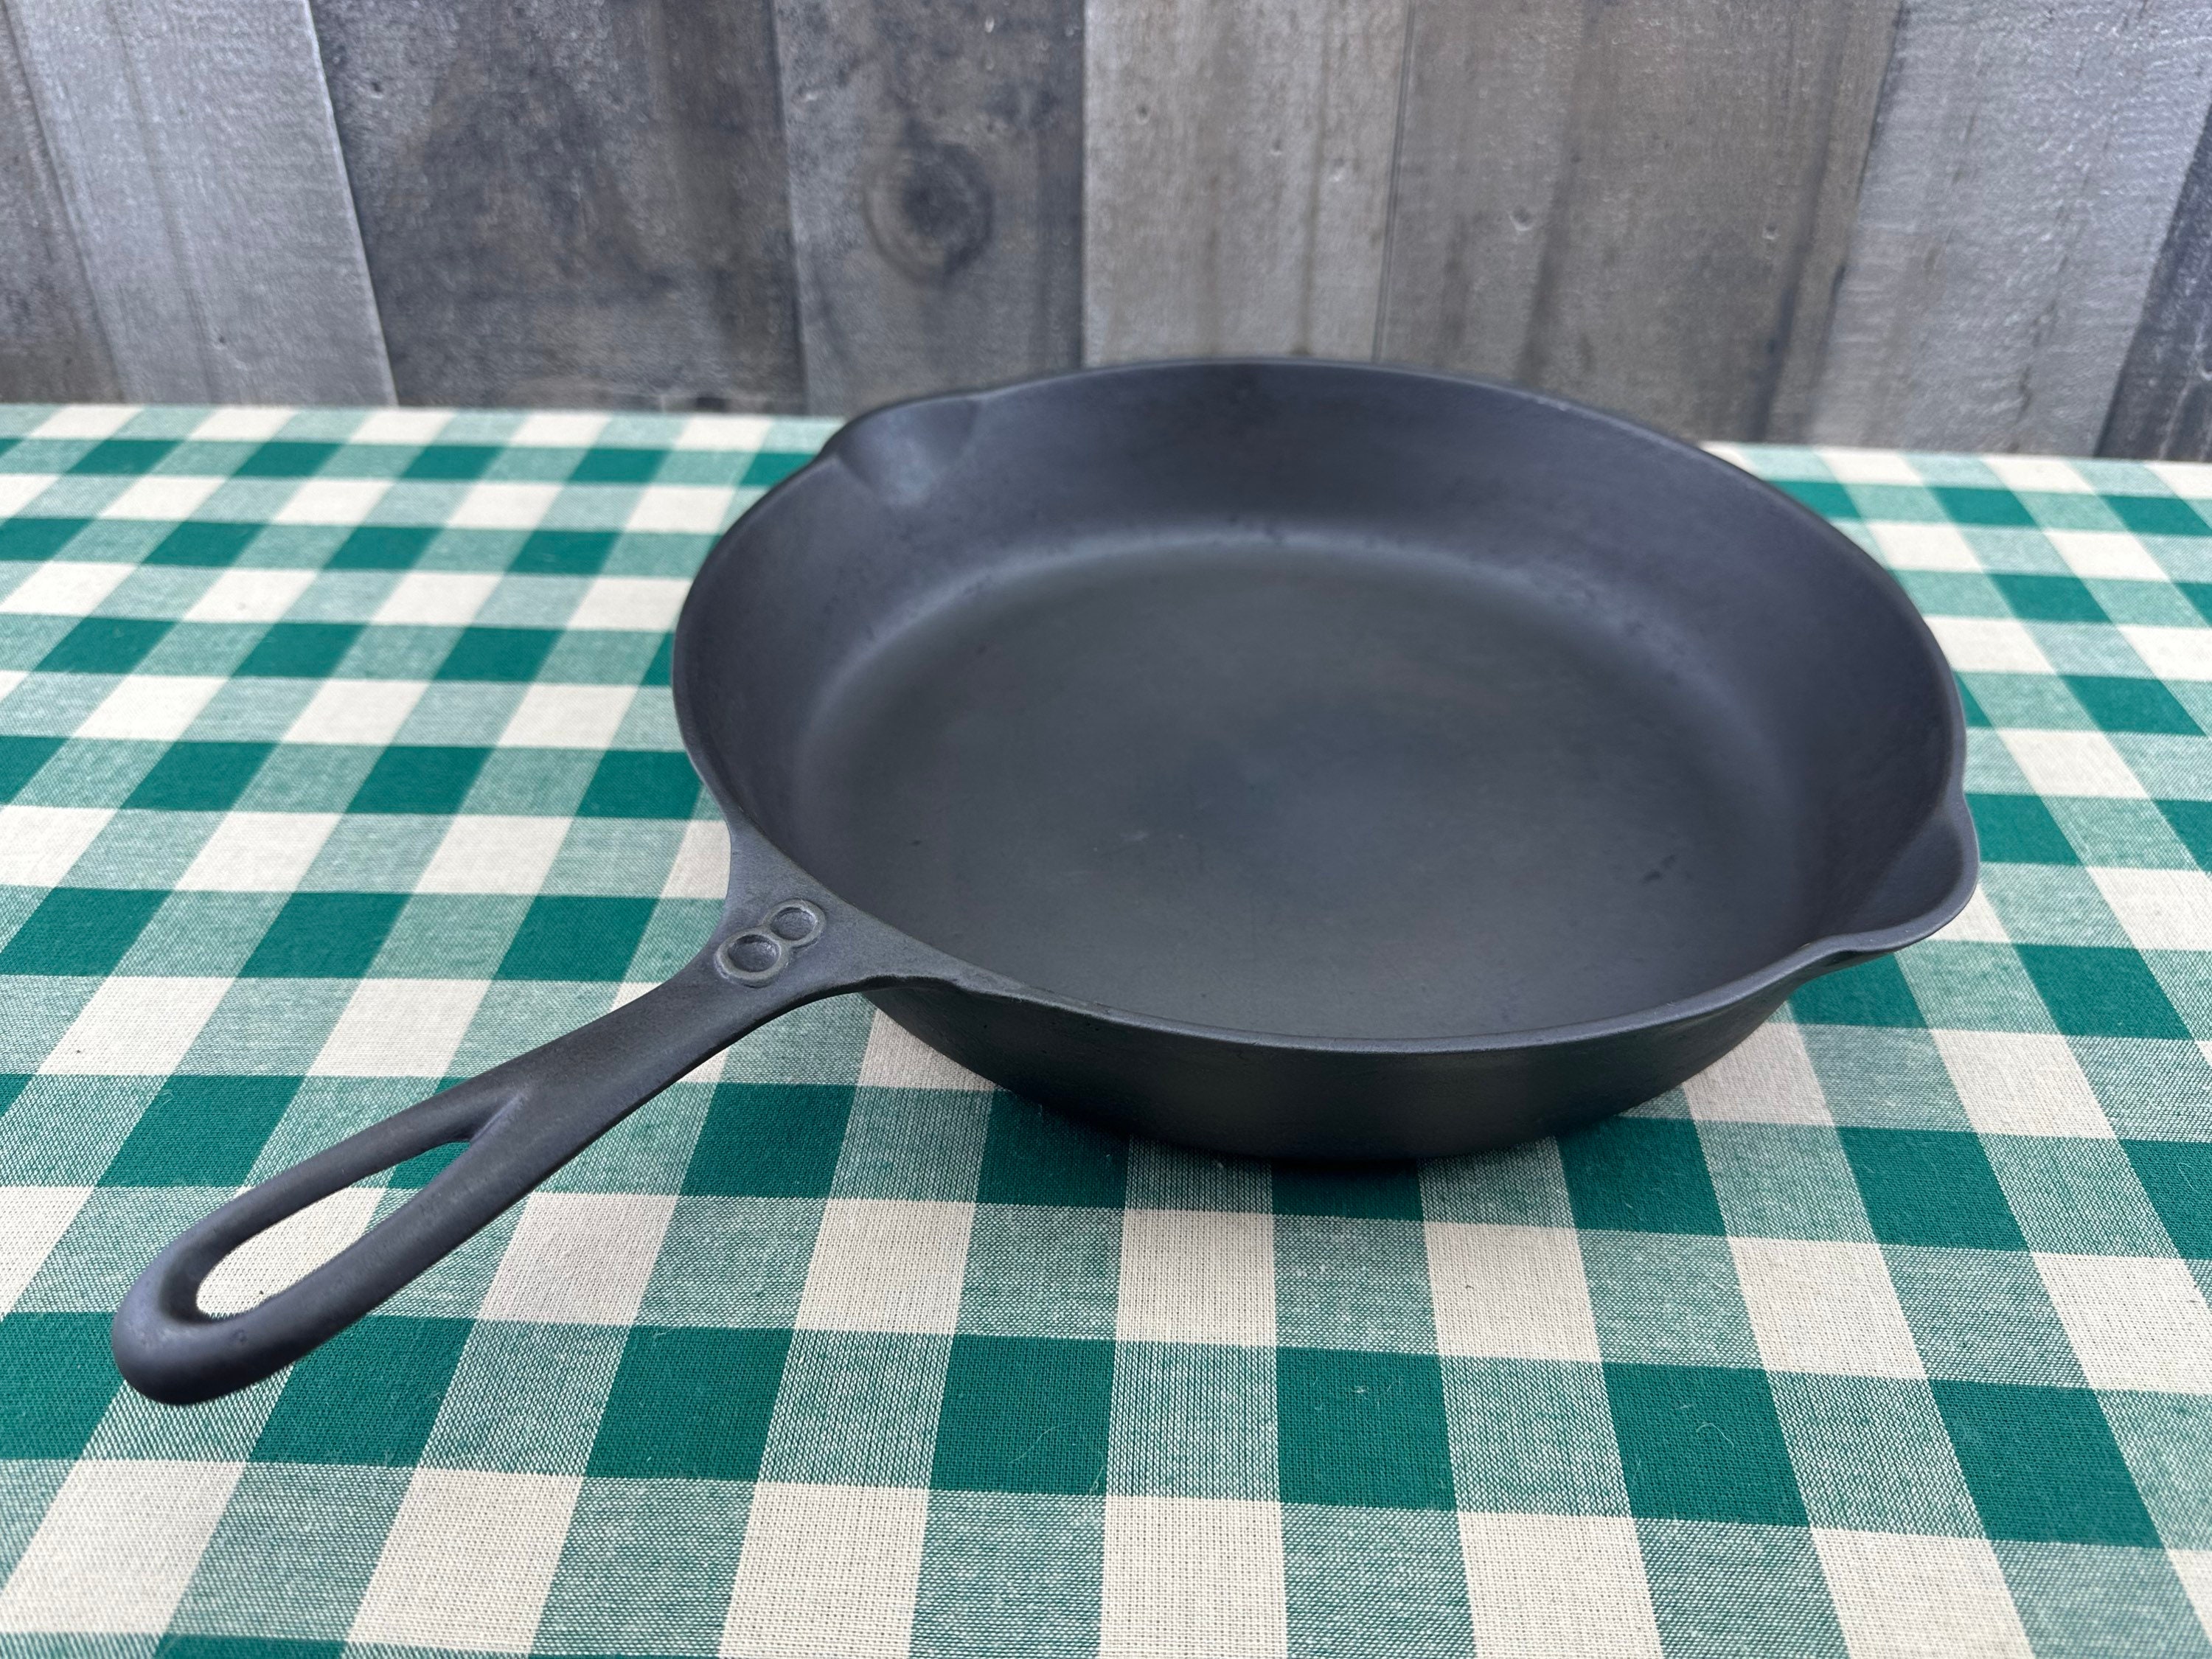 Lodge Cast Iron - No more cutting off the skillet handle to fit on